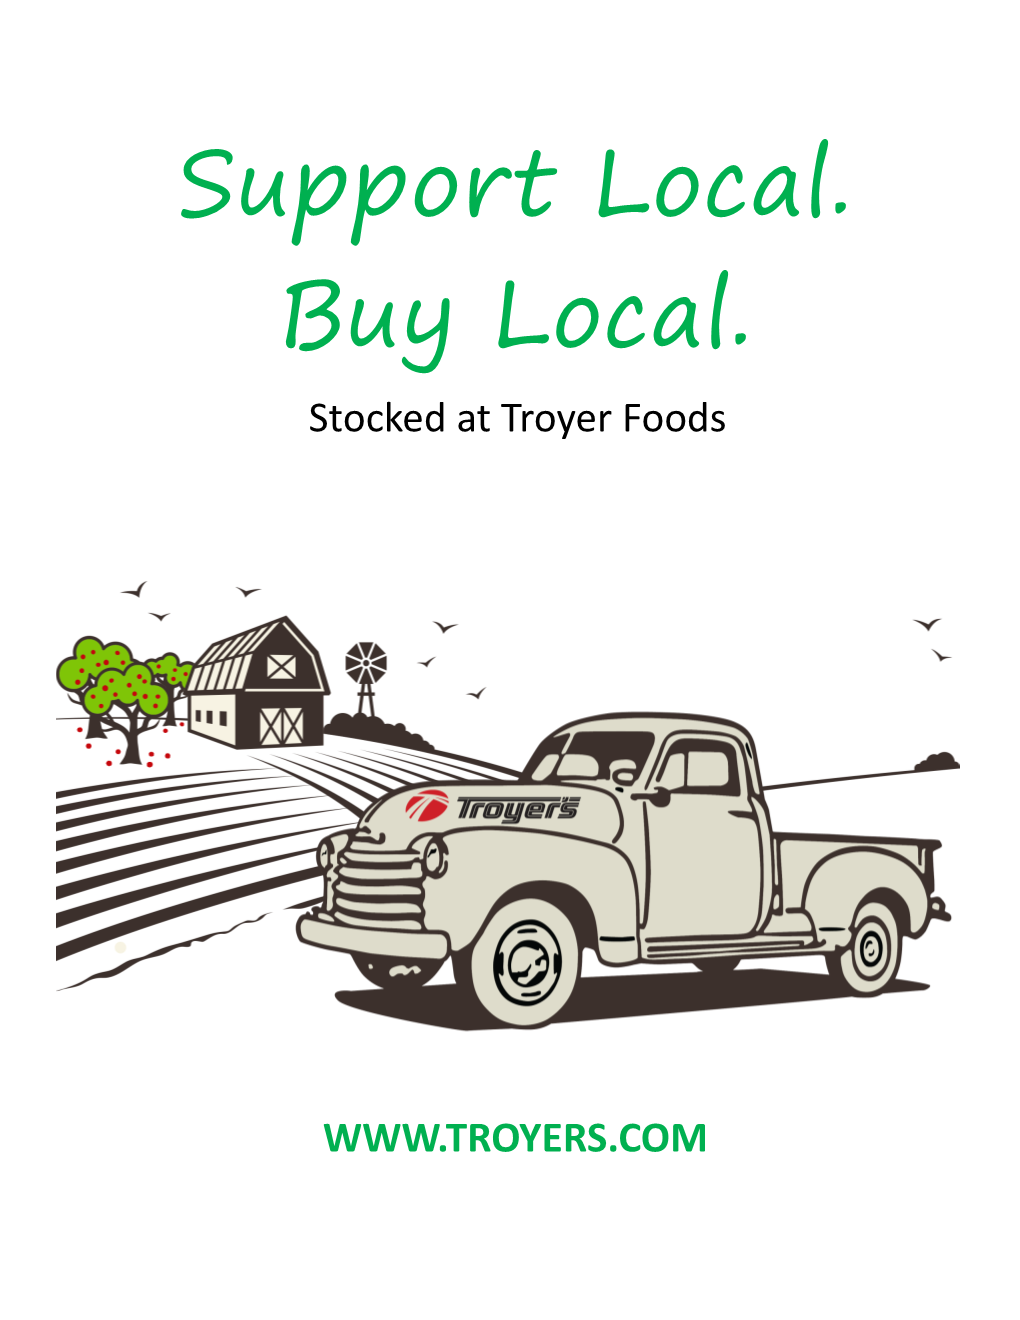 Buy Local. Stocked at Troyer Foods